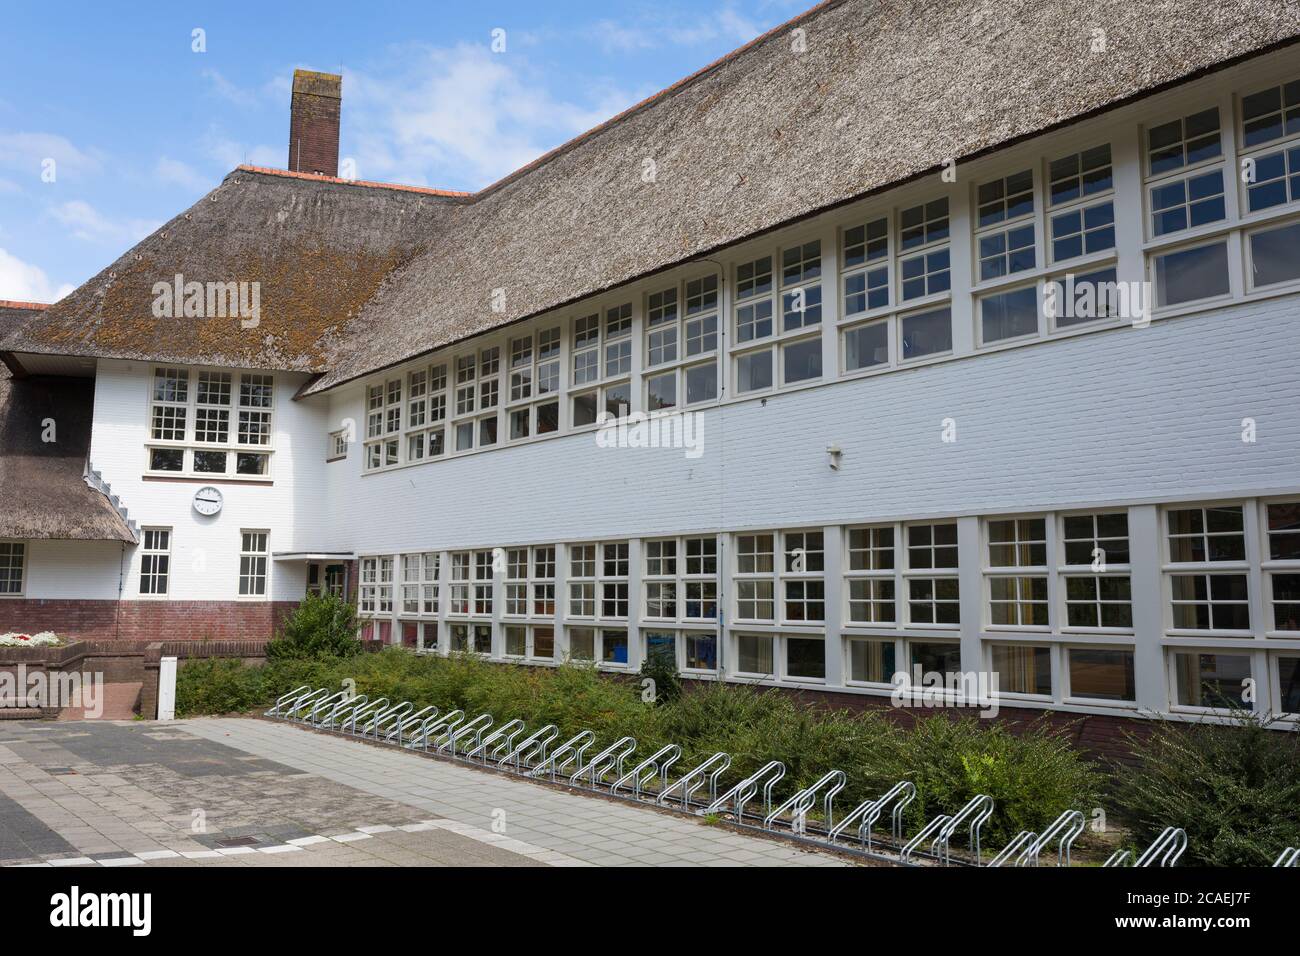 Fabritius school with straw roofing built in 1925 by architect Dudok, Hilversum Netherlands Stock Photo